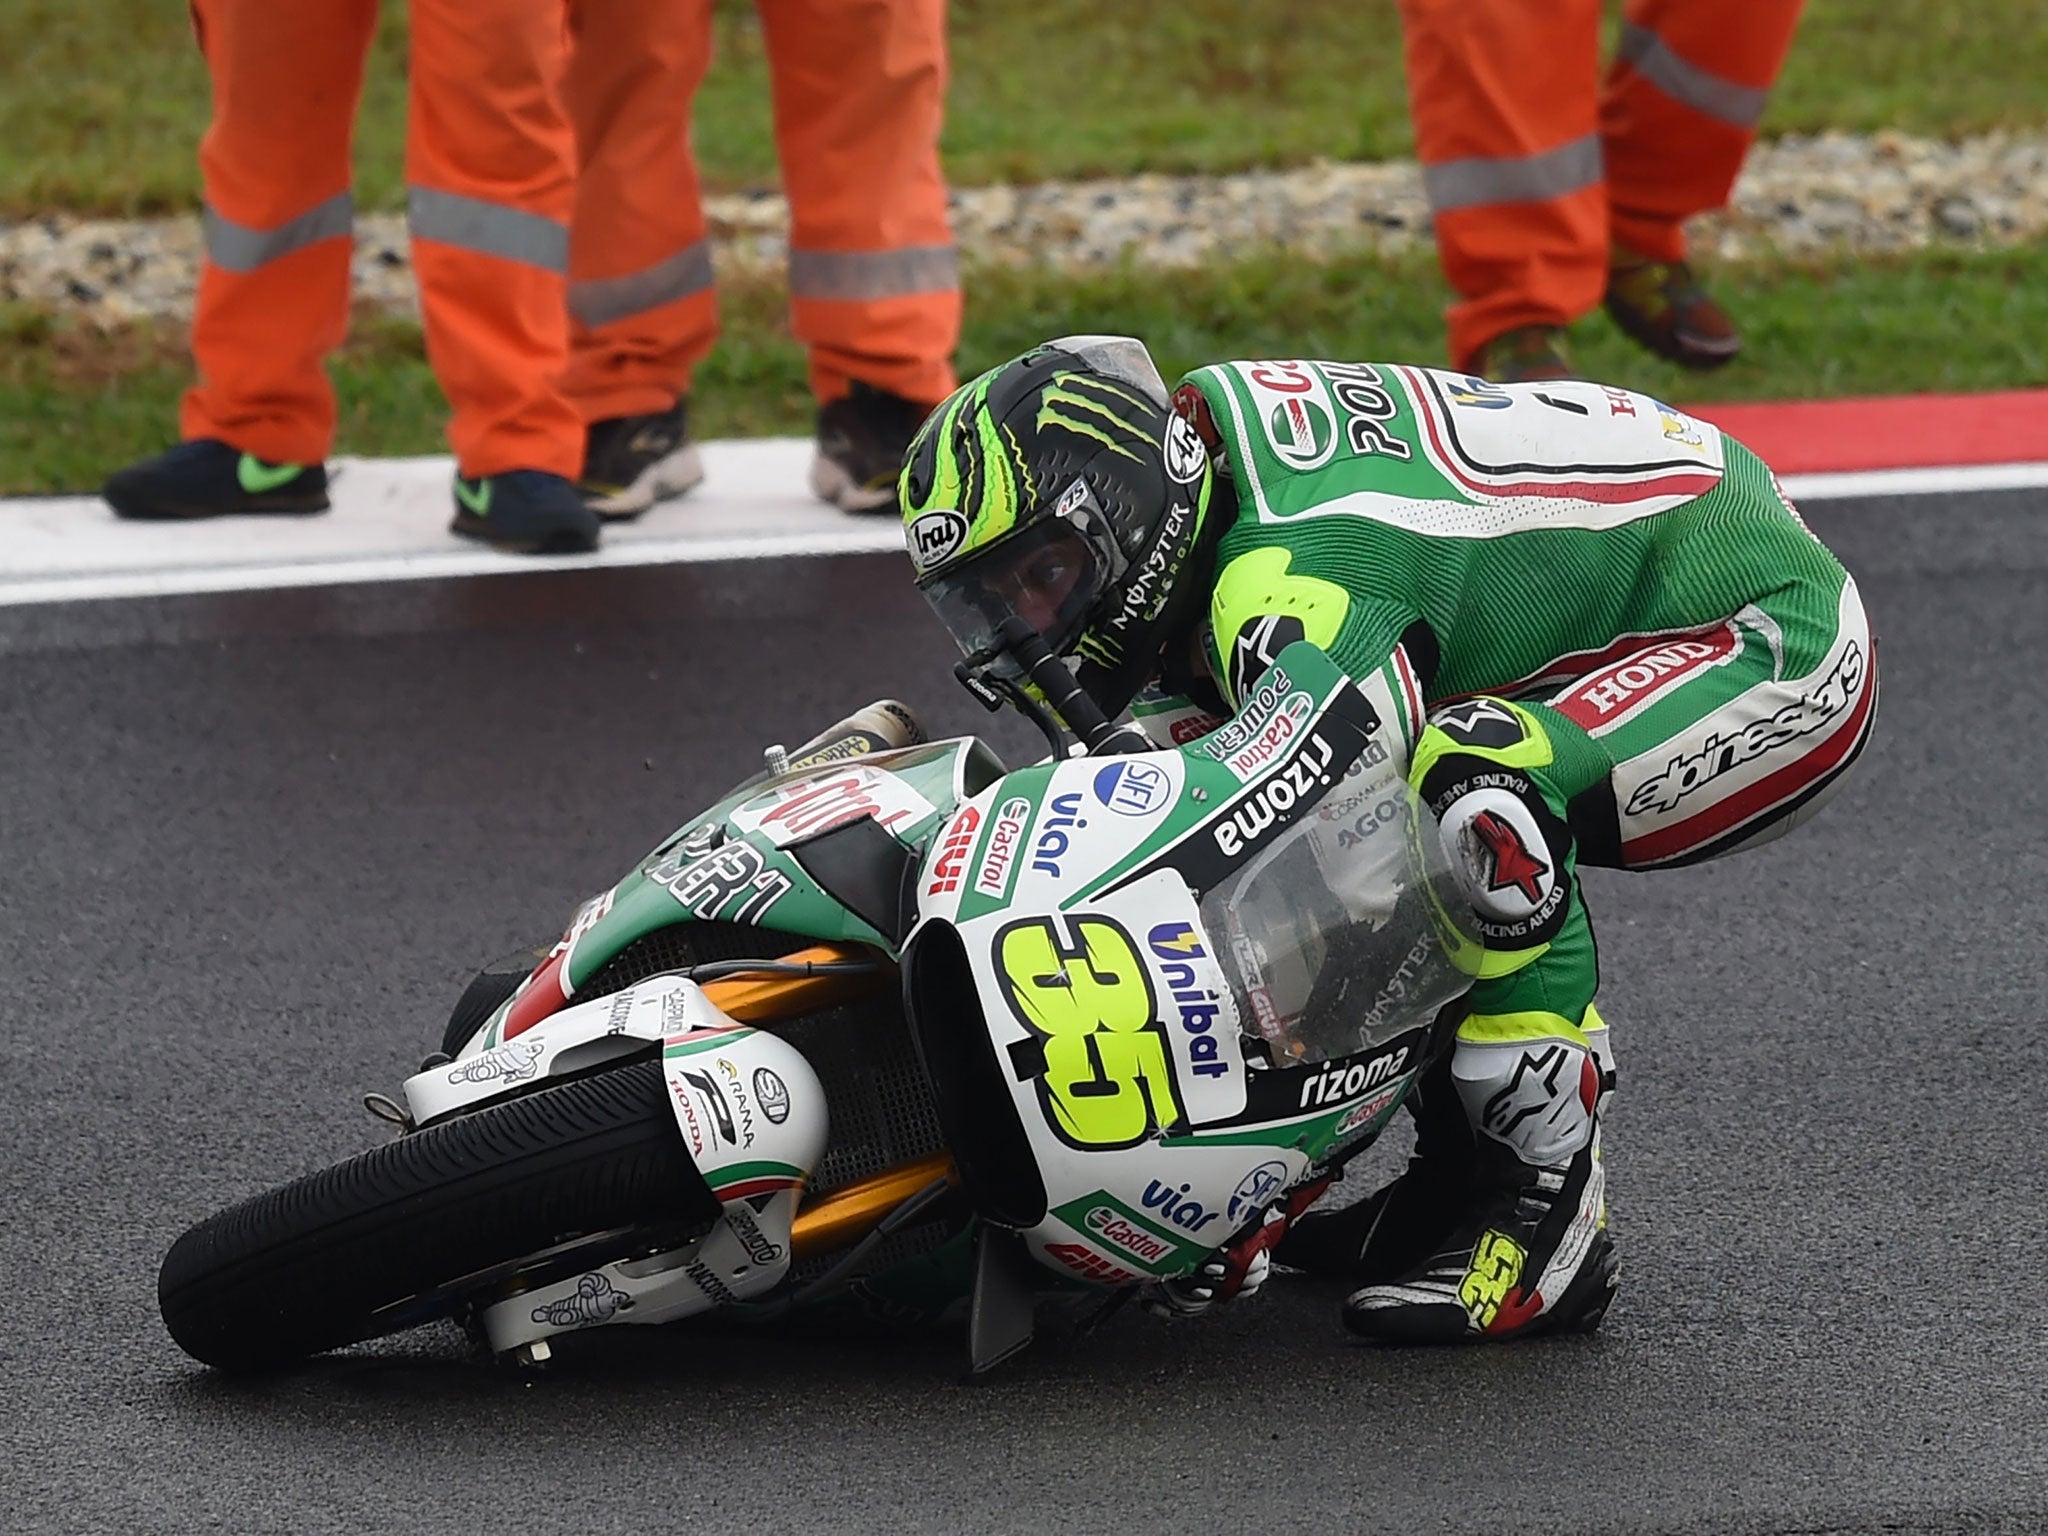 Crutchlow crashed out of the Malaysian Grand Prix while in touch with the race leaders